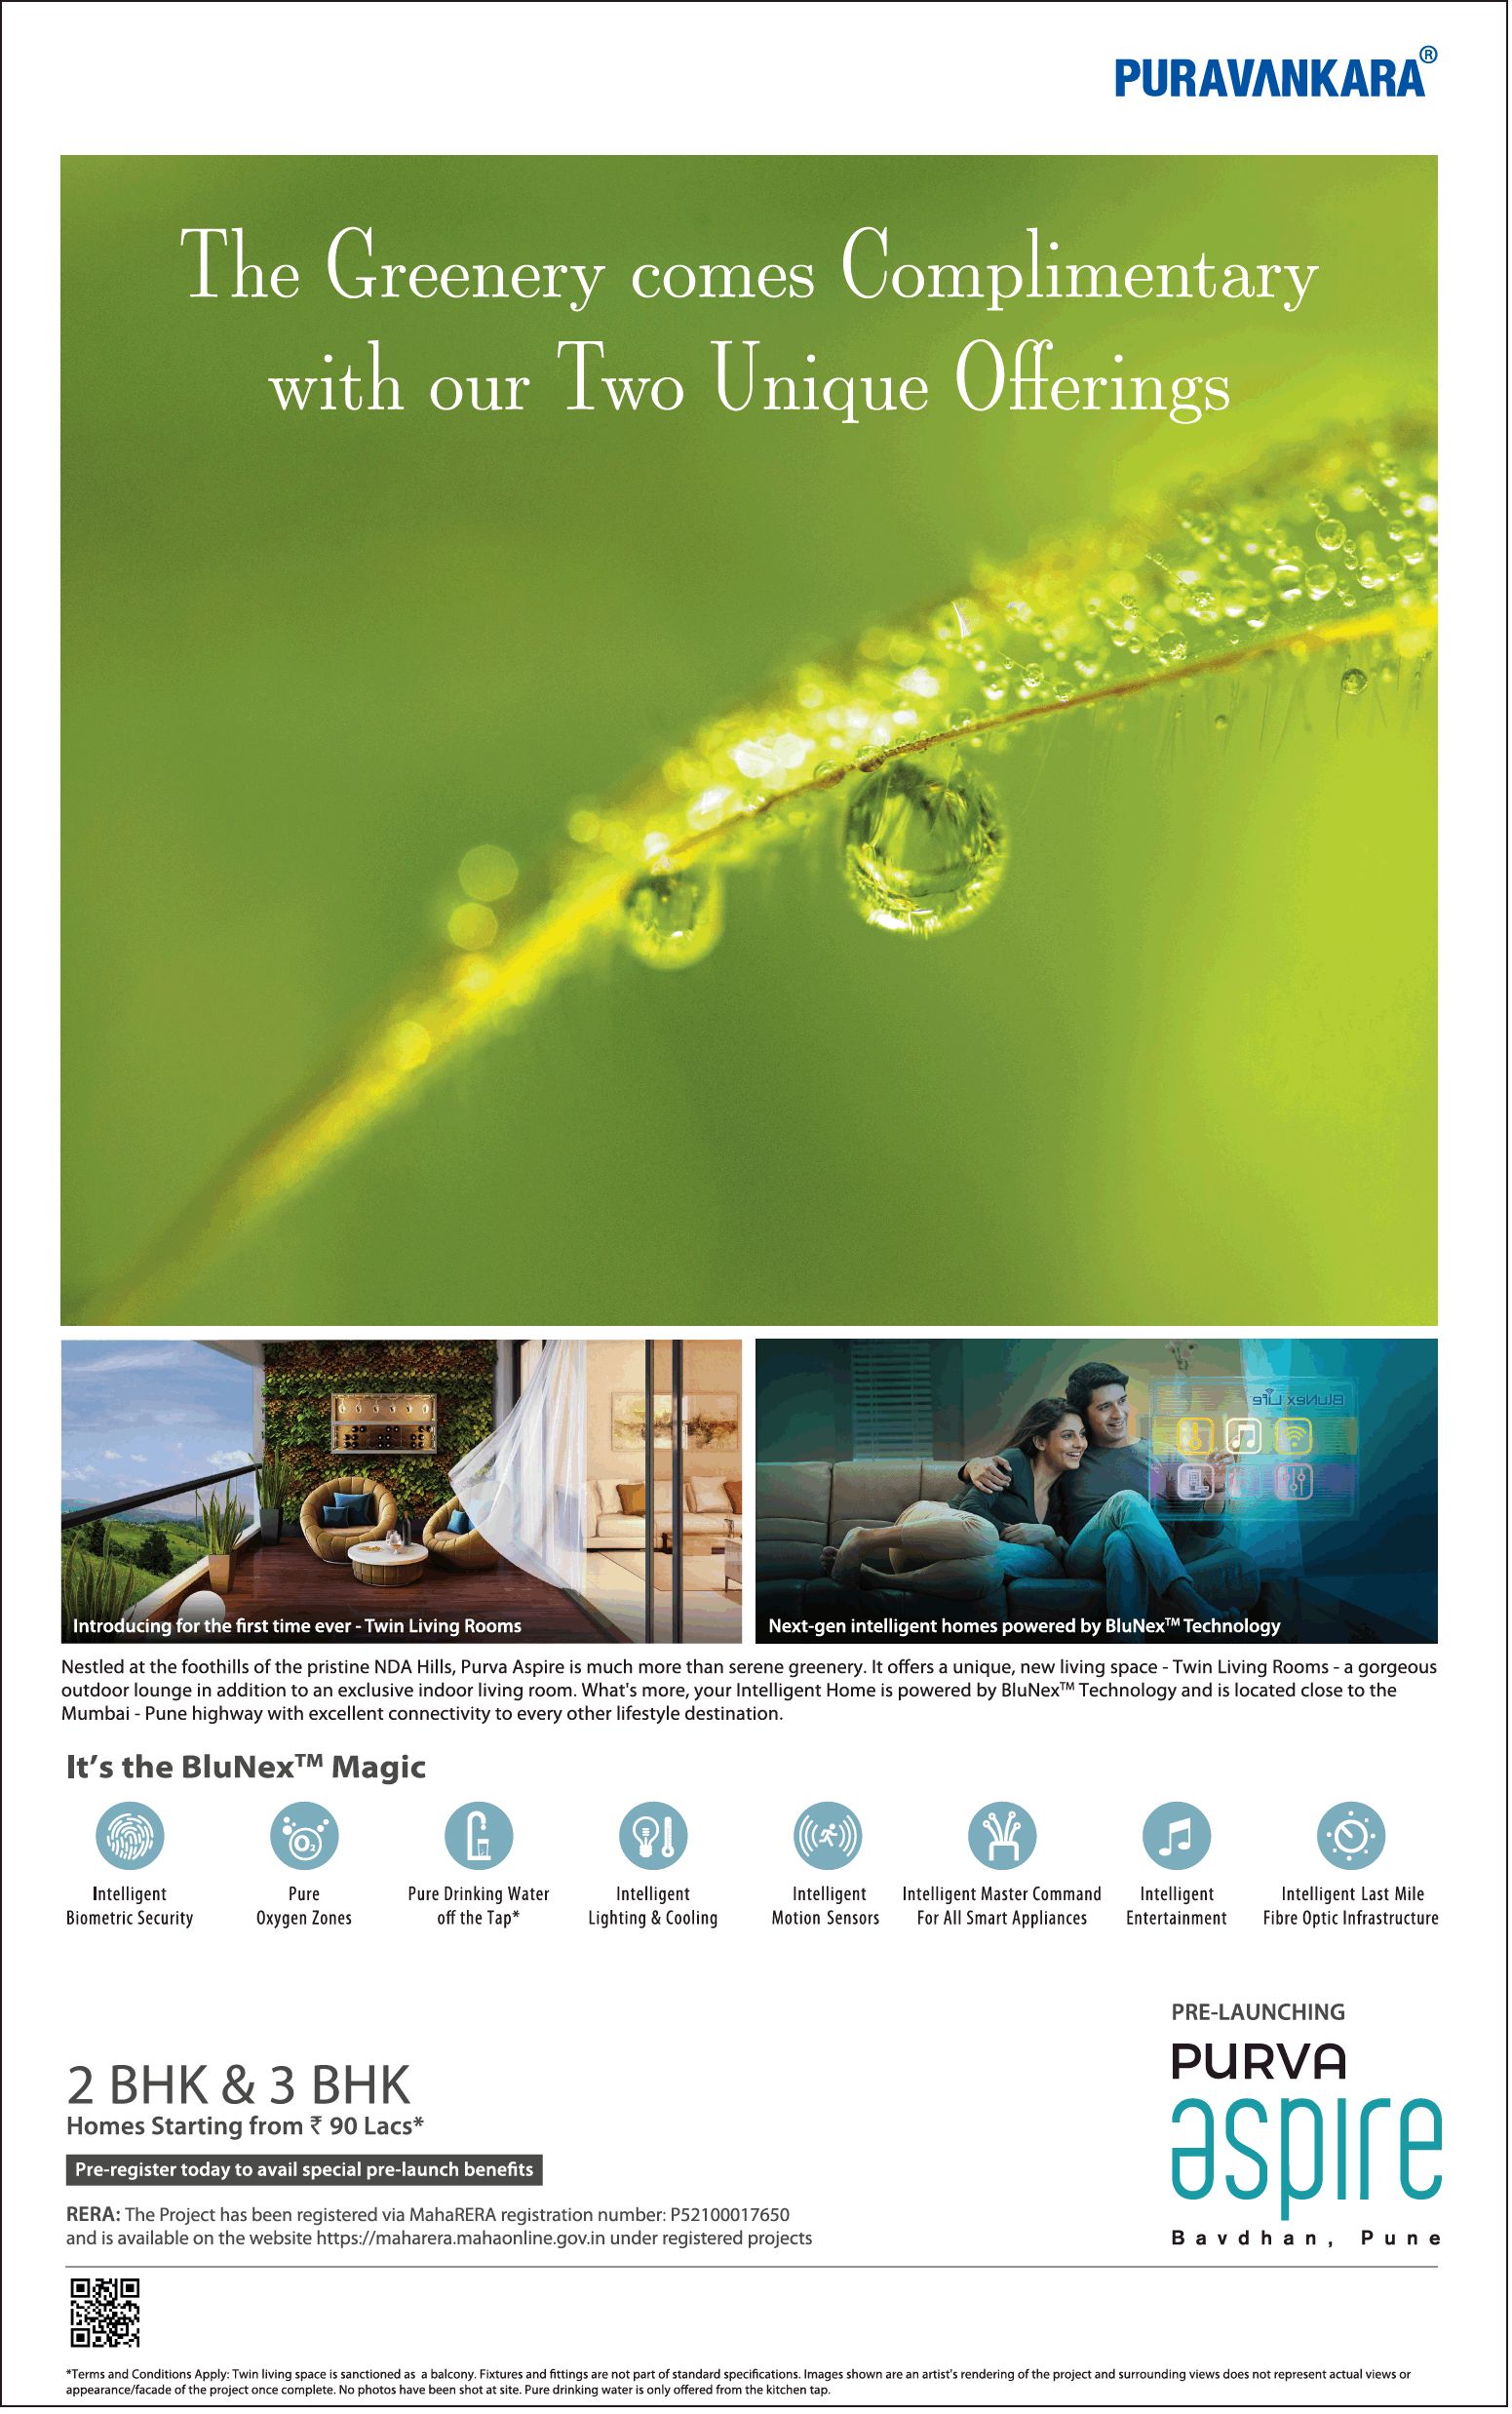 The greenery comes complimentary with our two unique offerings at Purva Aspire in Bavdhan, Pune